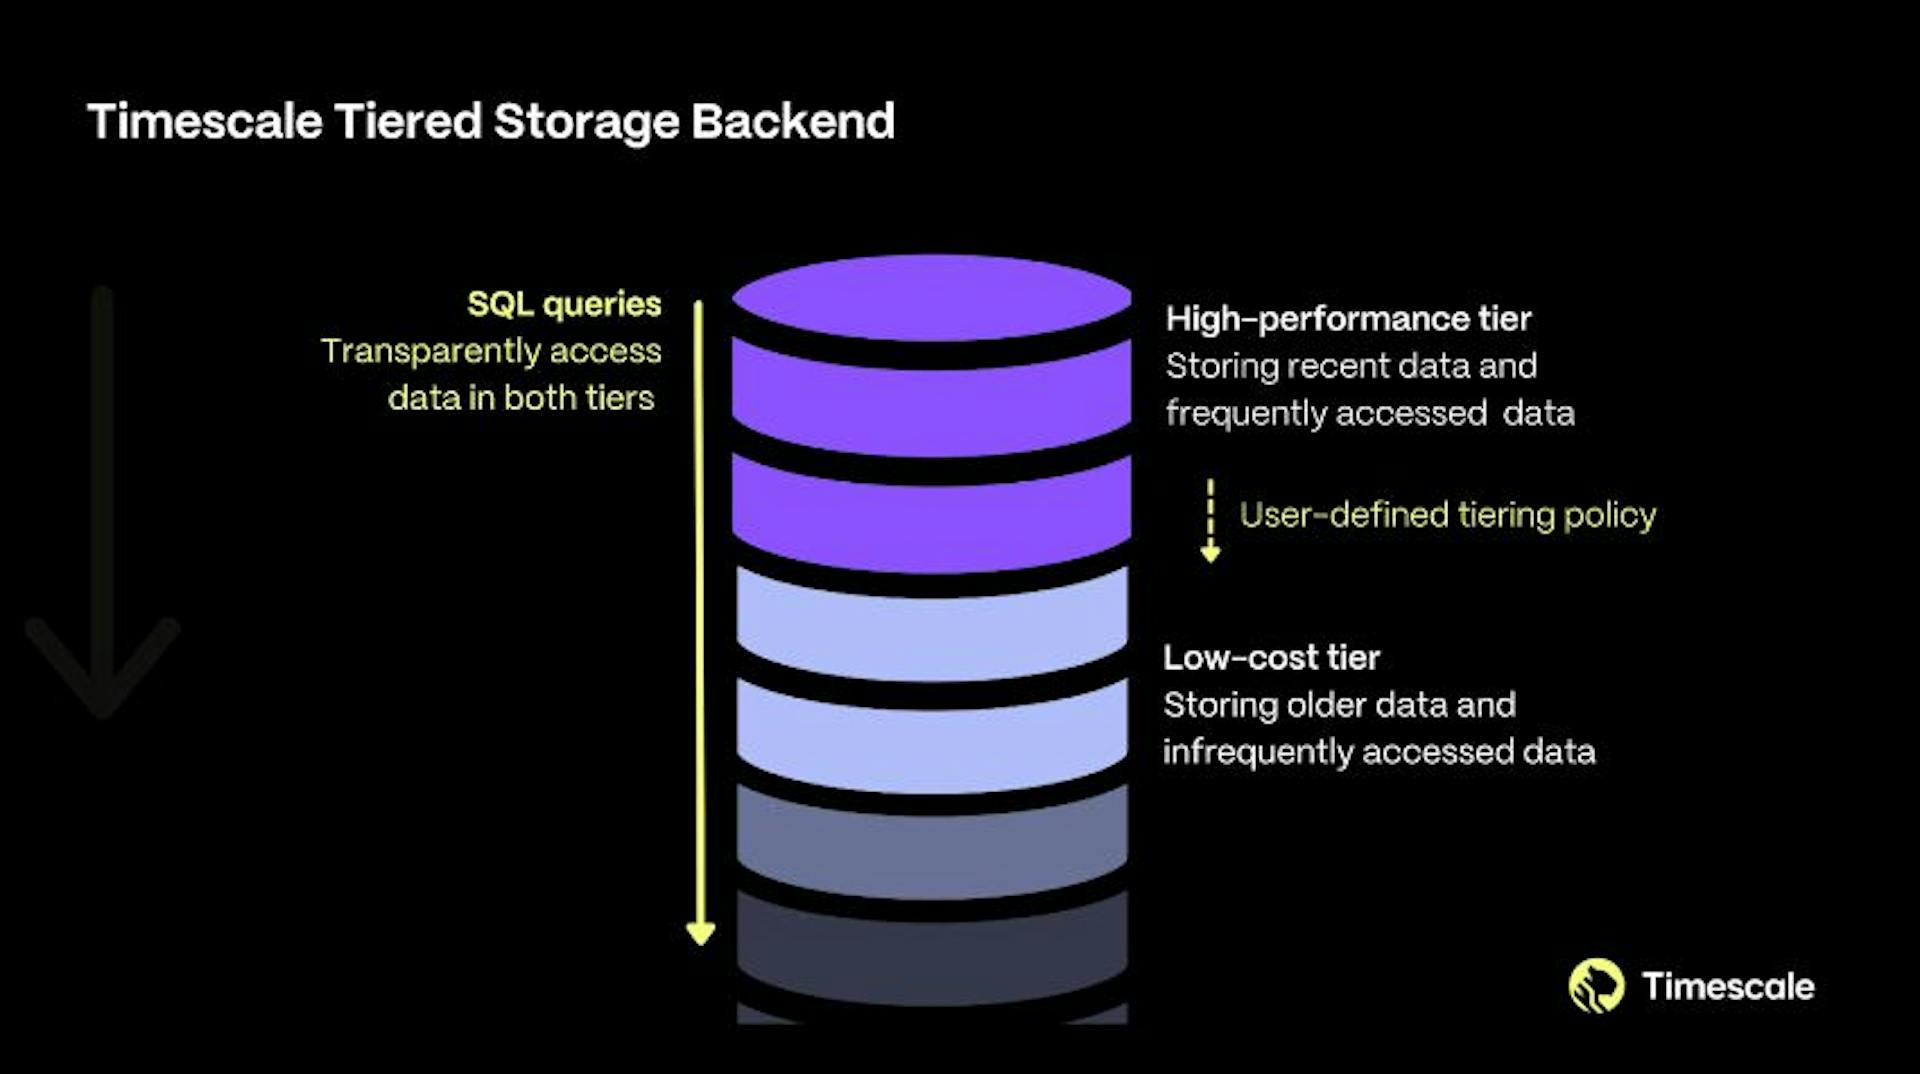 Timescale now has a Tiered Storage backend, combining two storage tiers to take advantage of both fast query performance and affordable scalability